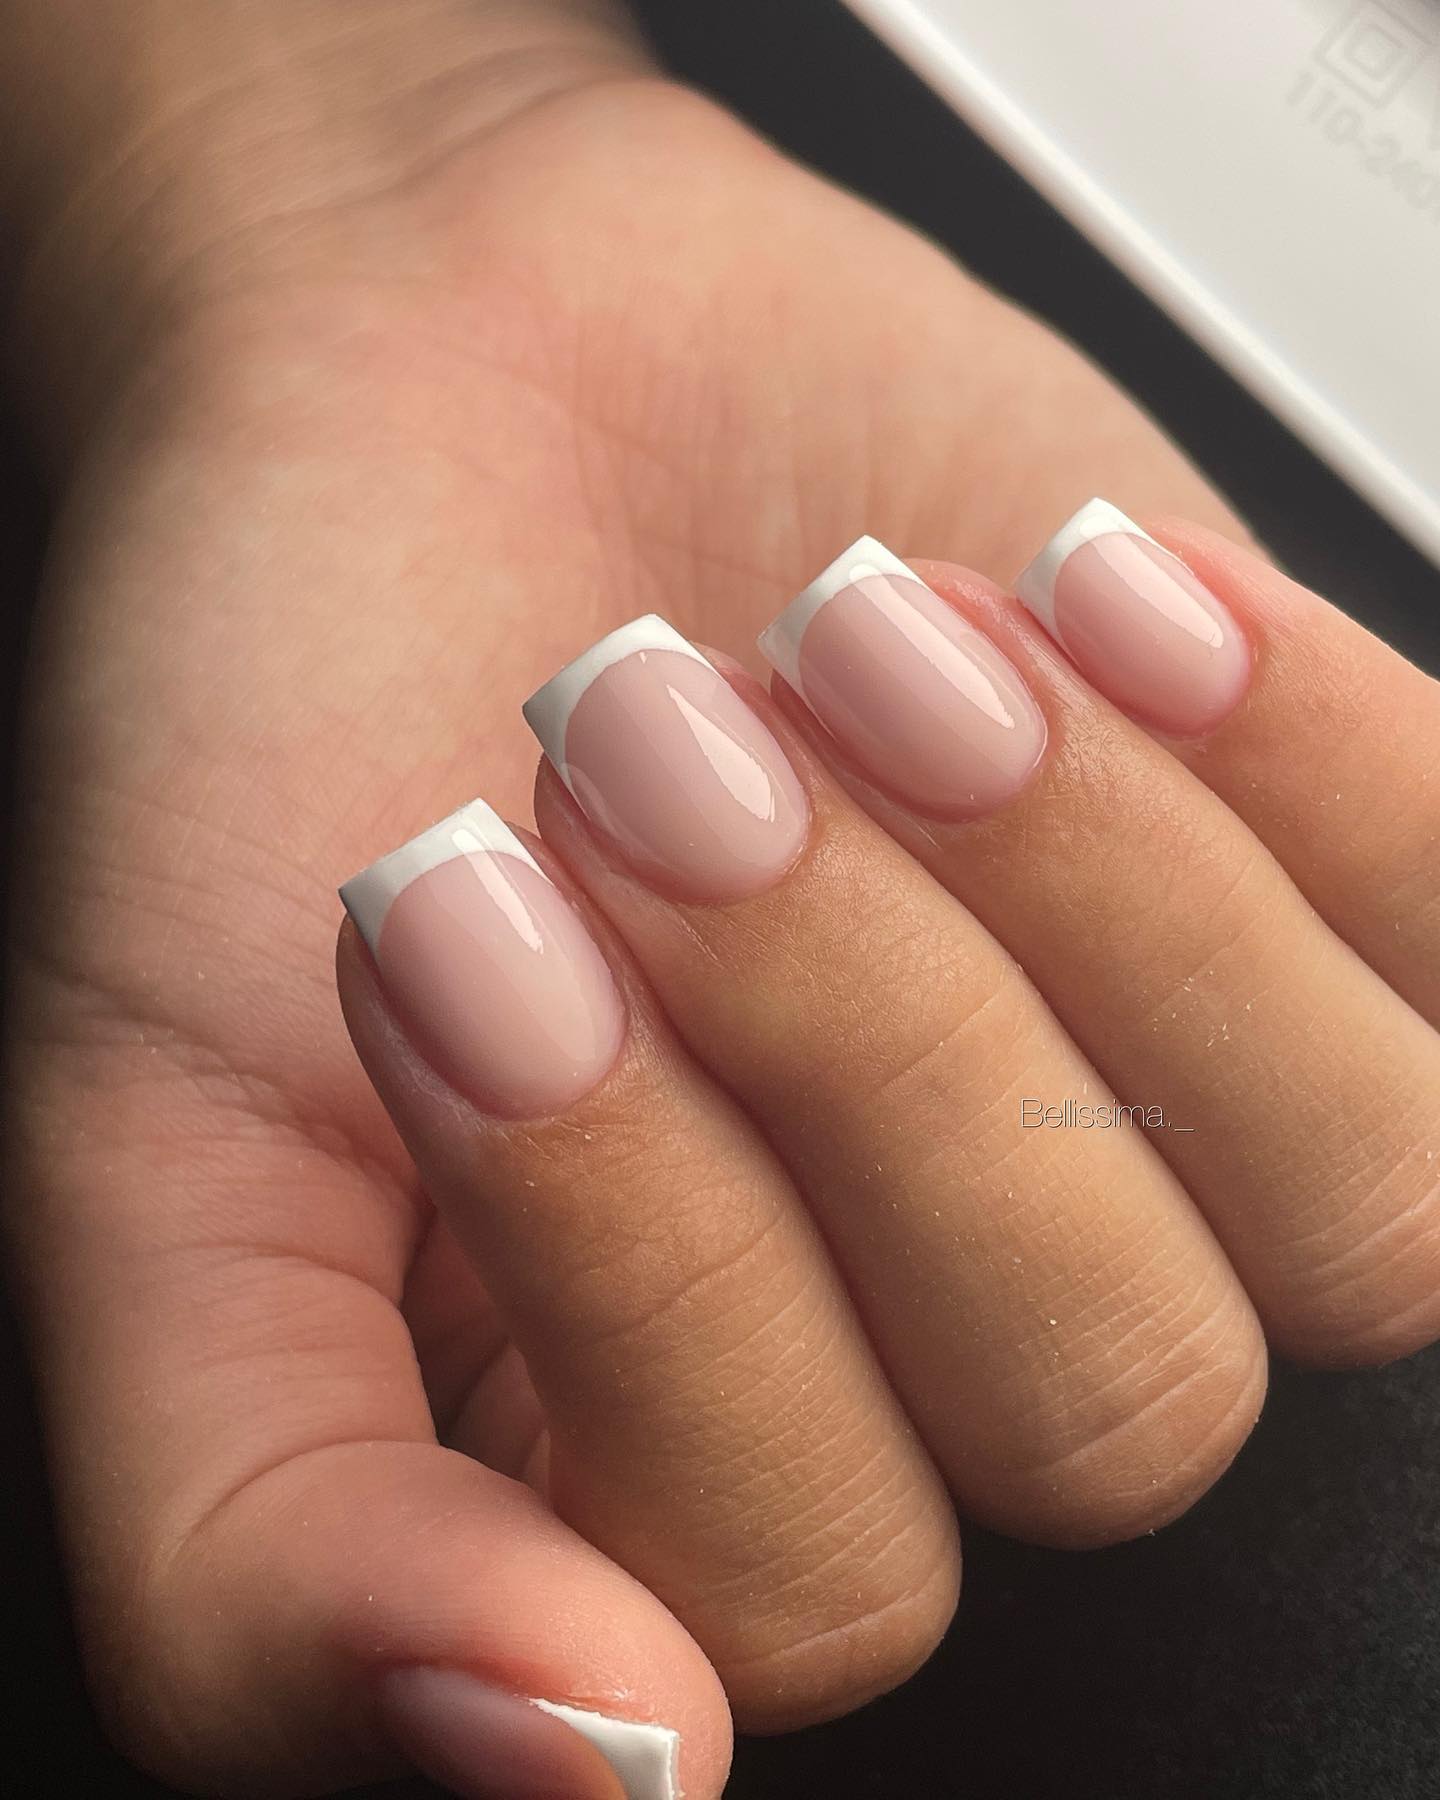 If you’re more so a fan of shorter low-maintenance French nail designs why not book this type of manicure with your nail tech?